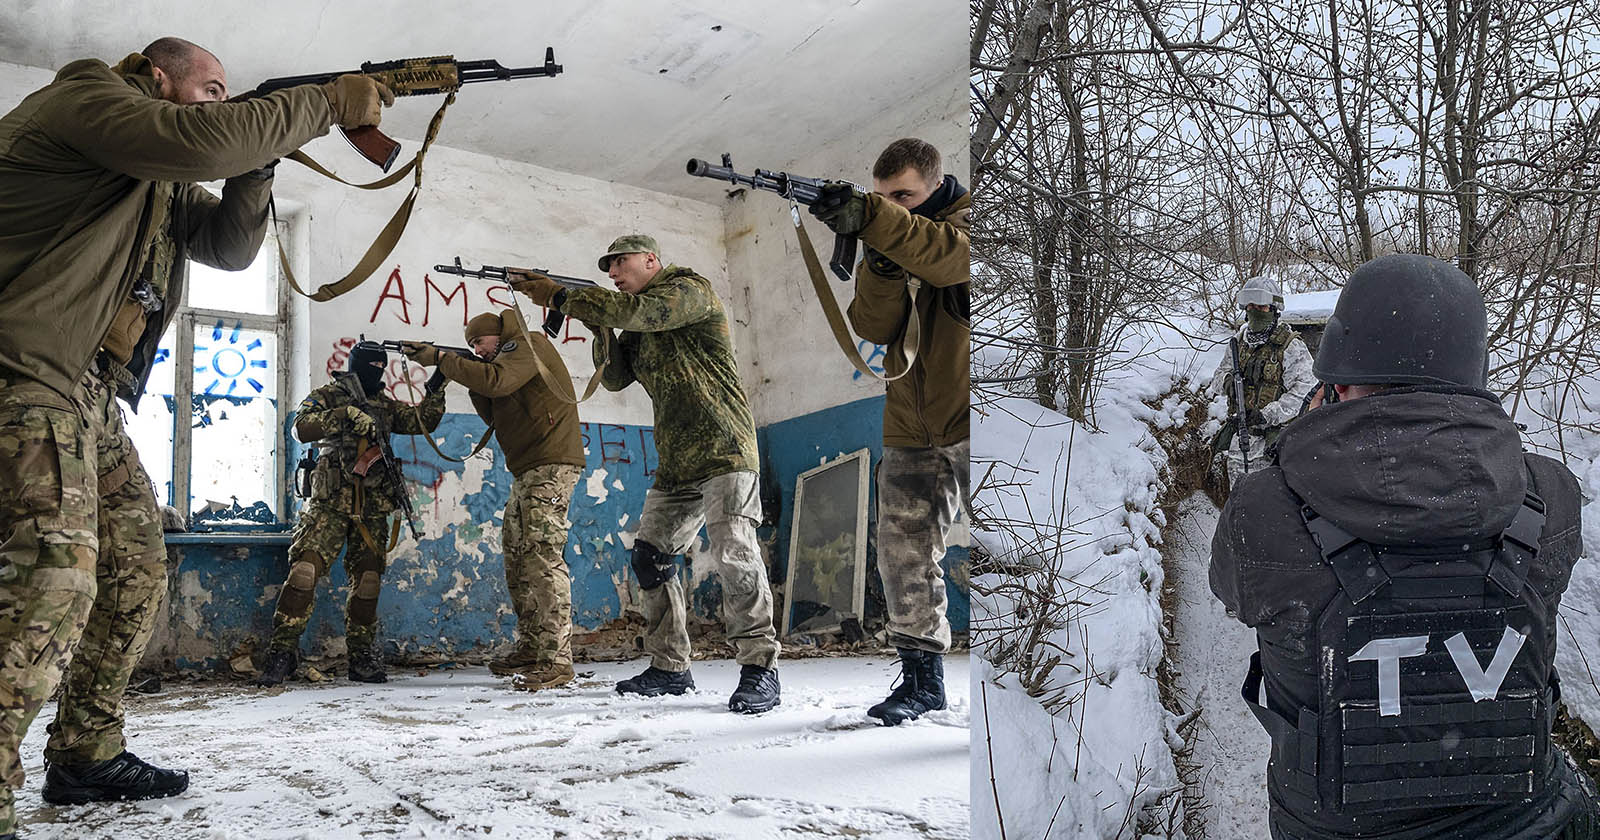 How to Stay Safe While Photographing the War in Ukraine | PetaPixel